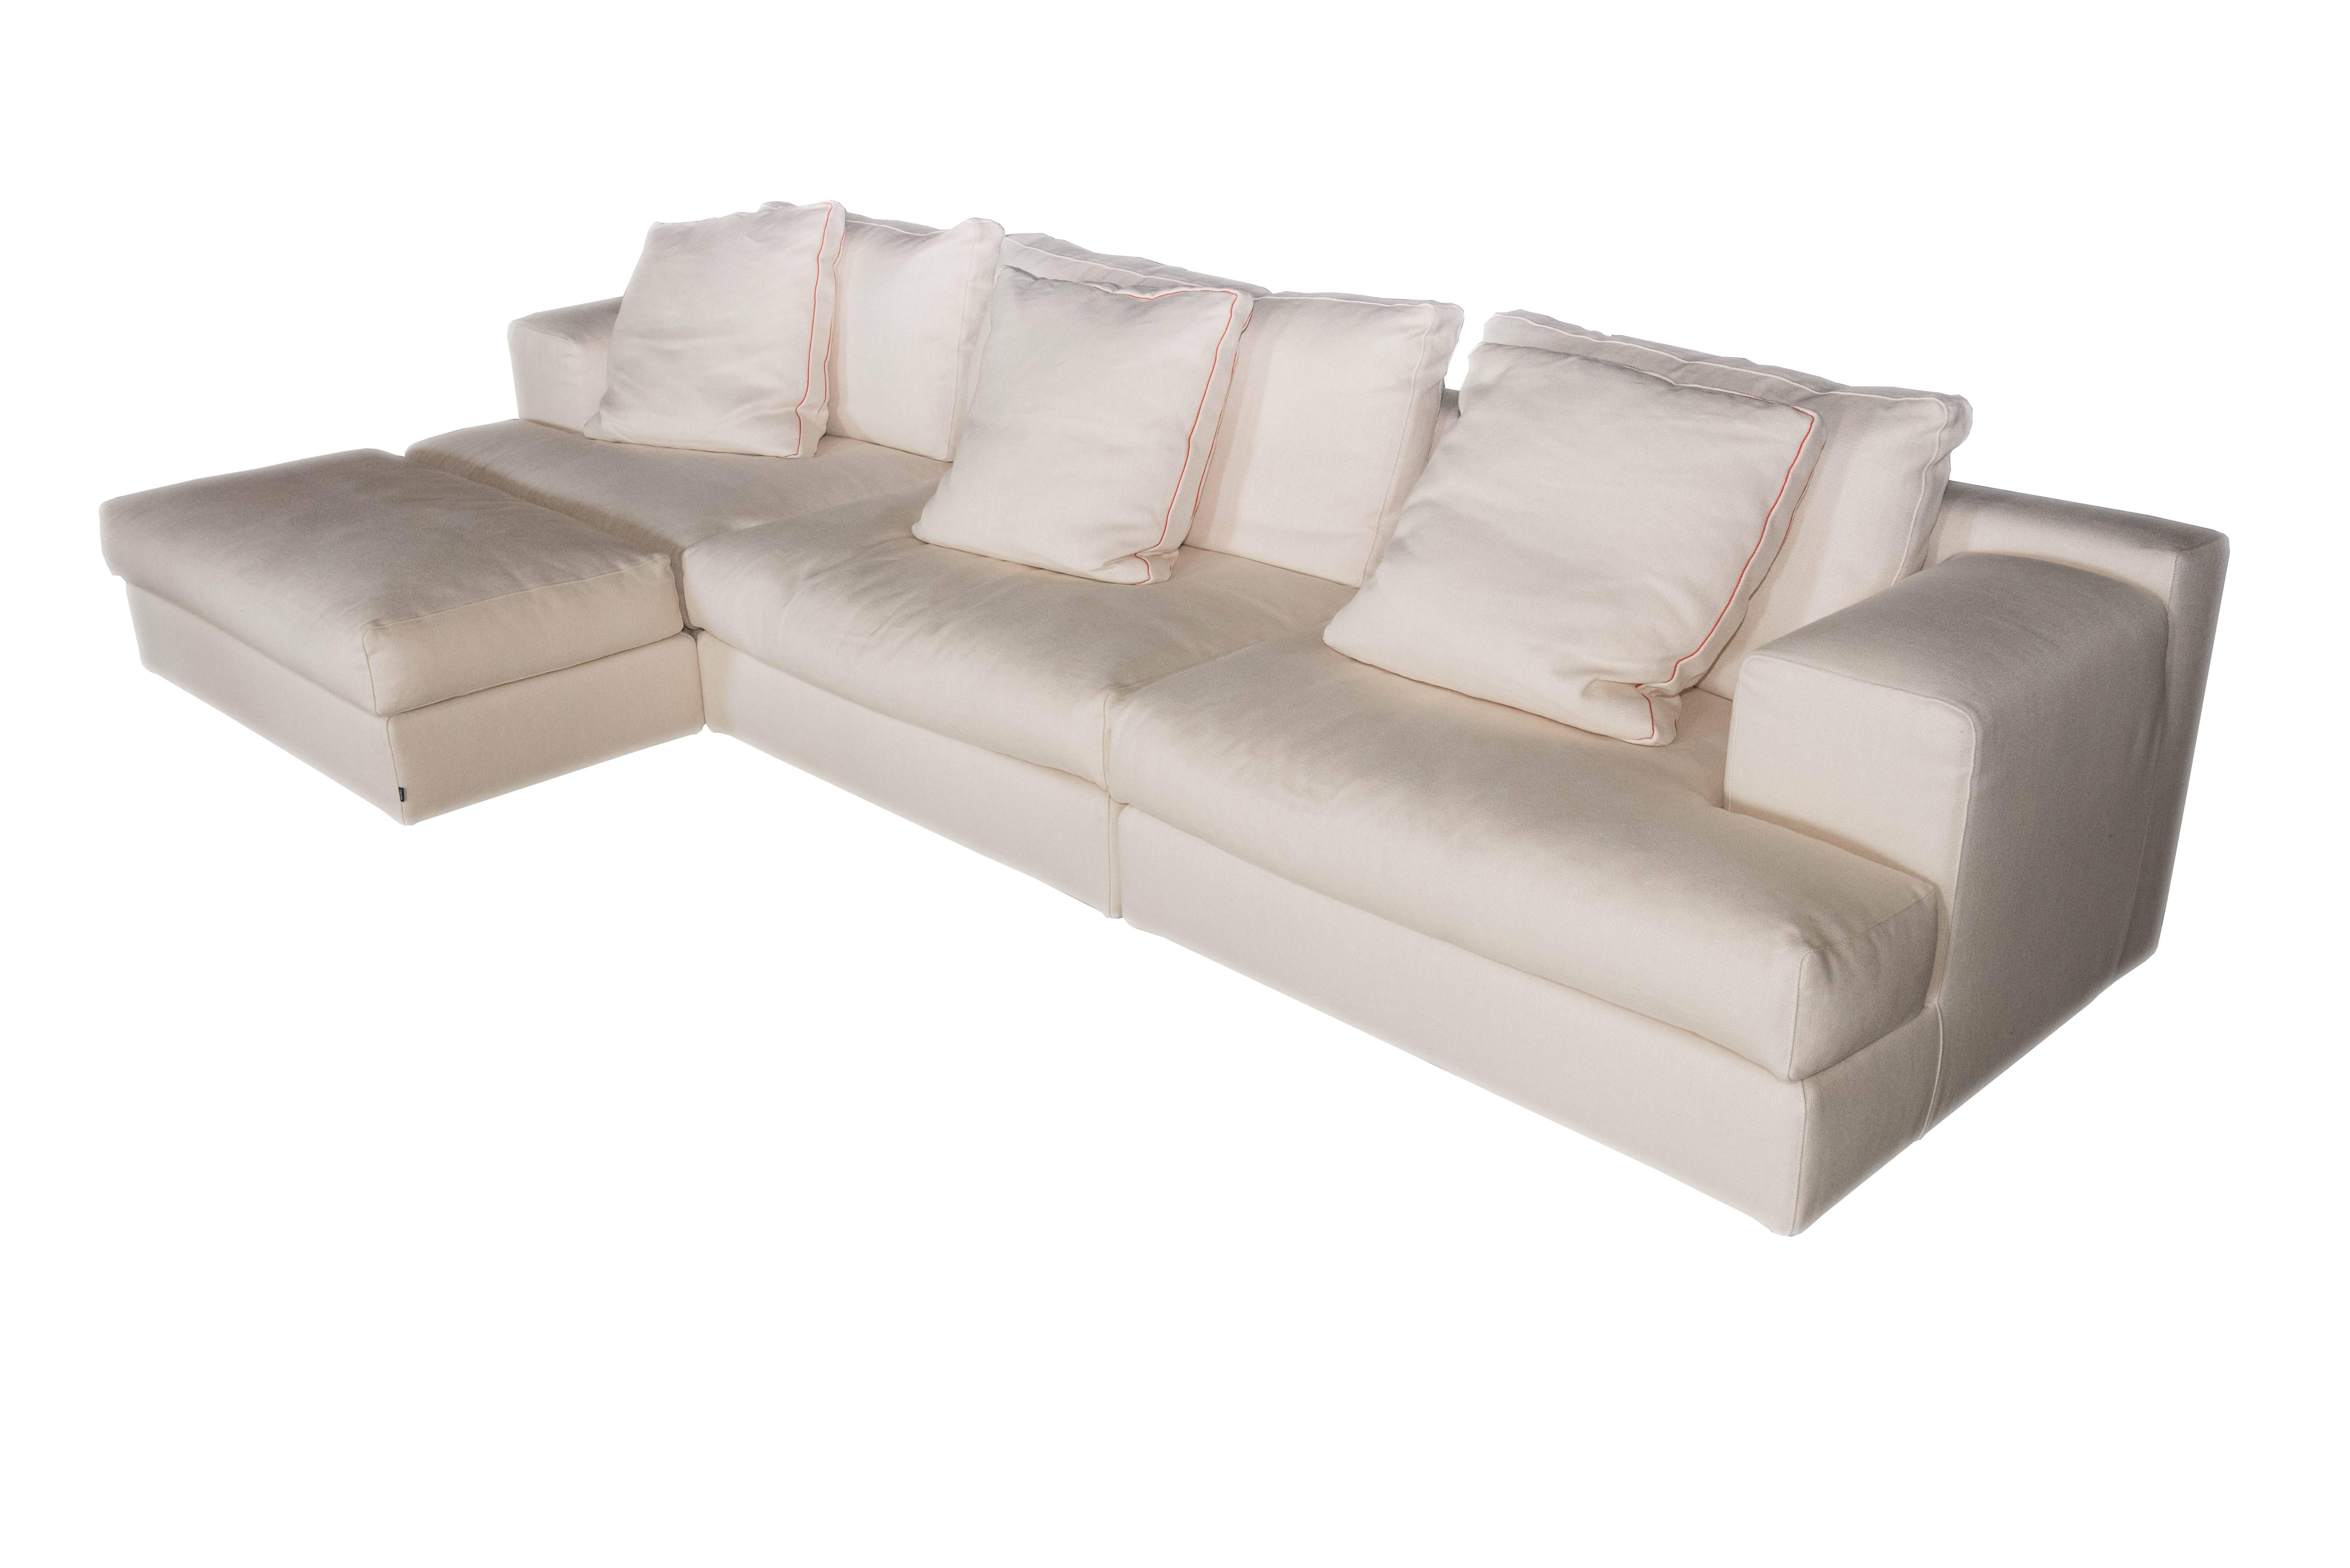 Framework with elastic belts and a CFC-free polyurethane.
Polyester or feather padding with polyurethane core. Upholstery is in removable fabric or leather. Additional cushions, feather padded, are square with edge in the same fabric as the